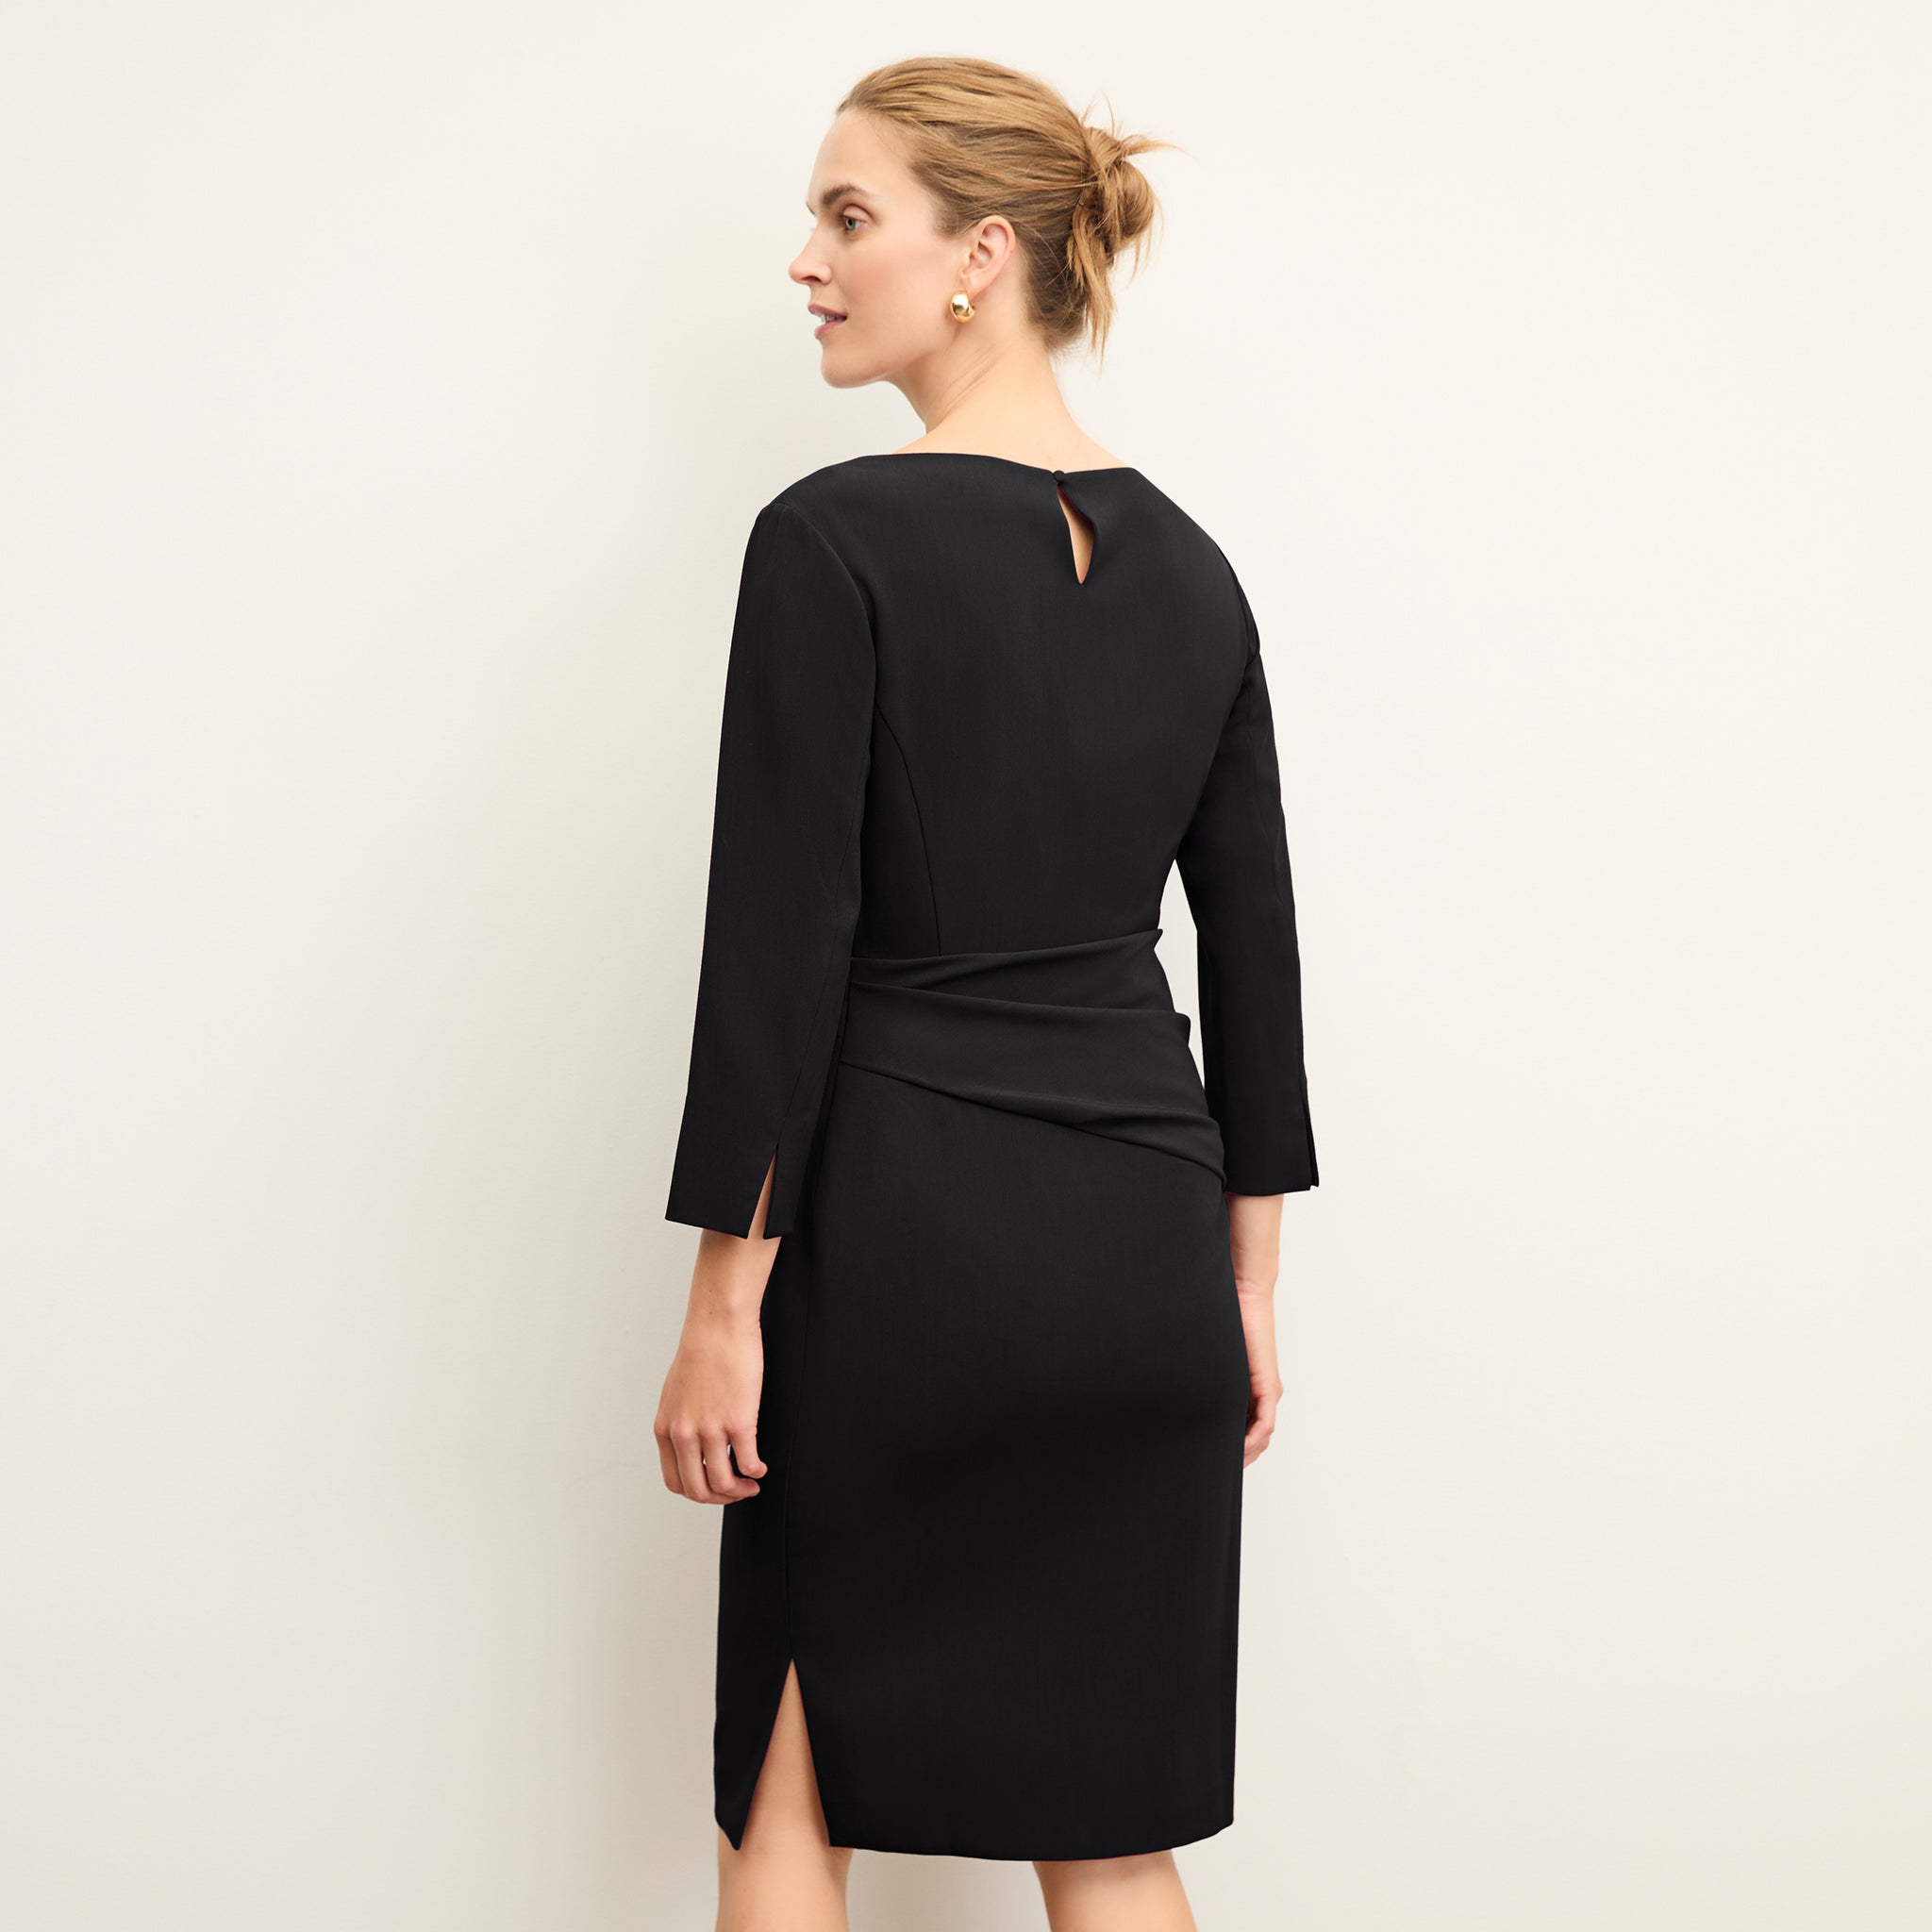 back image of a woman wearing the maxine dress in black 